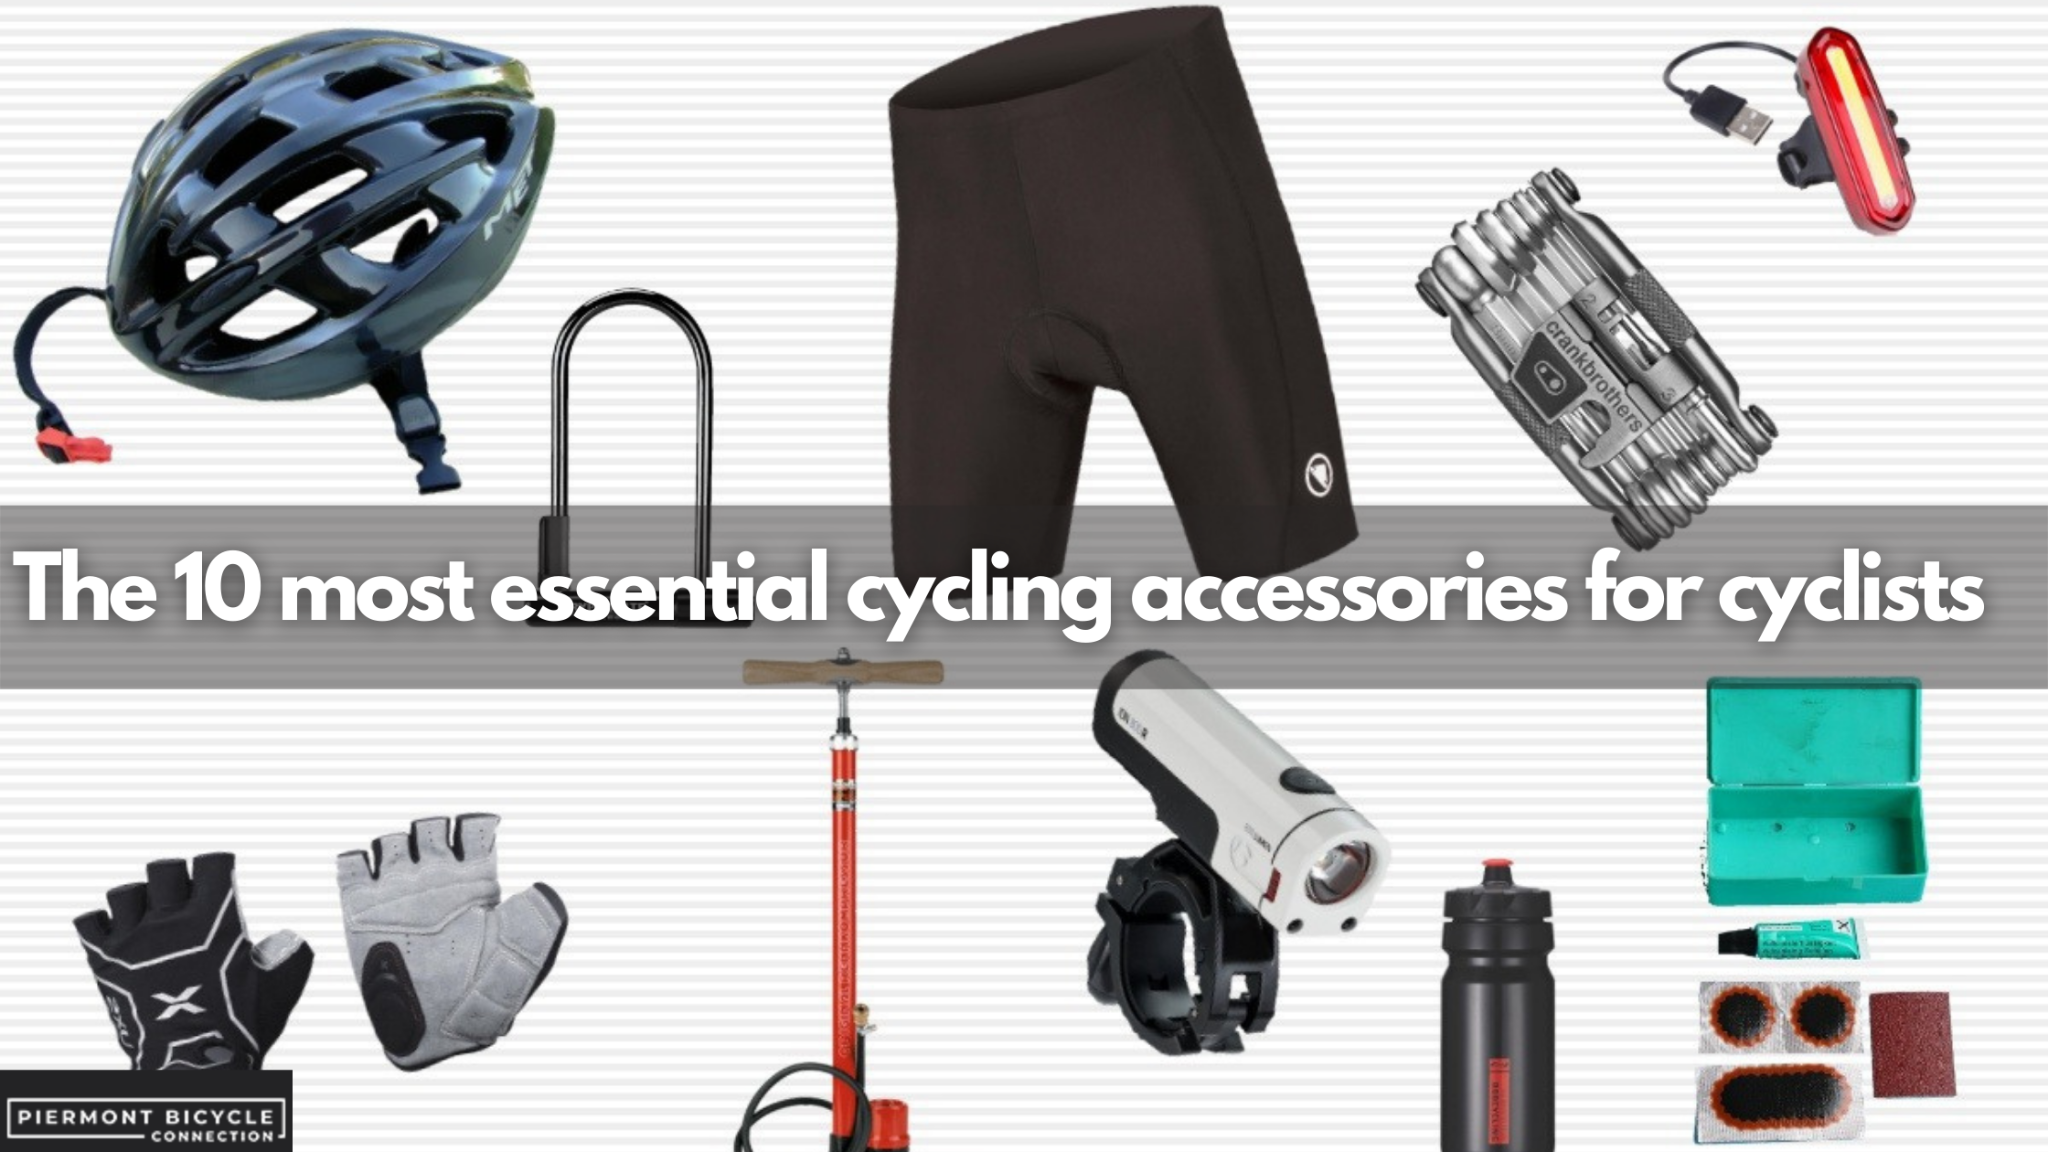 The 10 most essential cycling accessories for cyclists